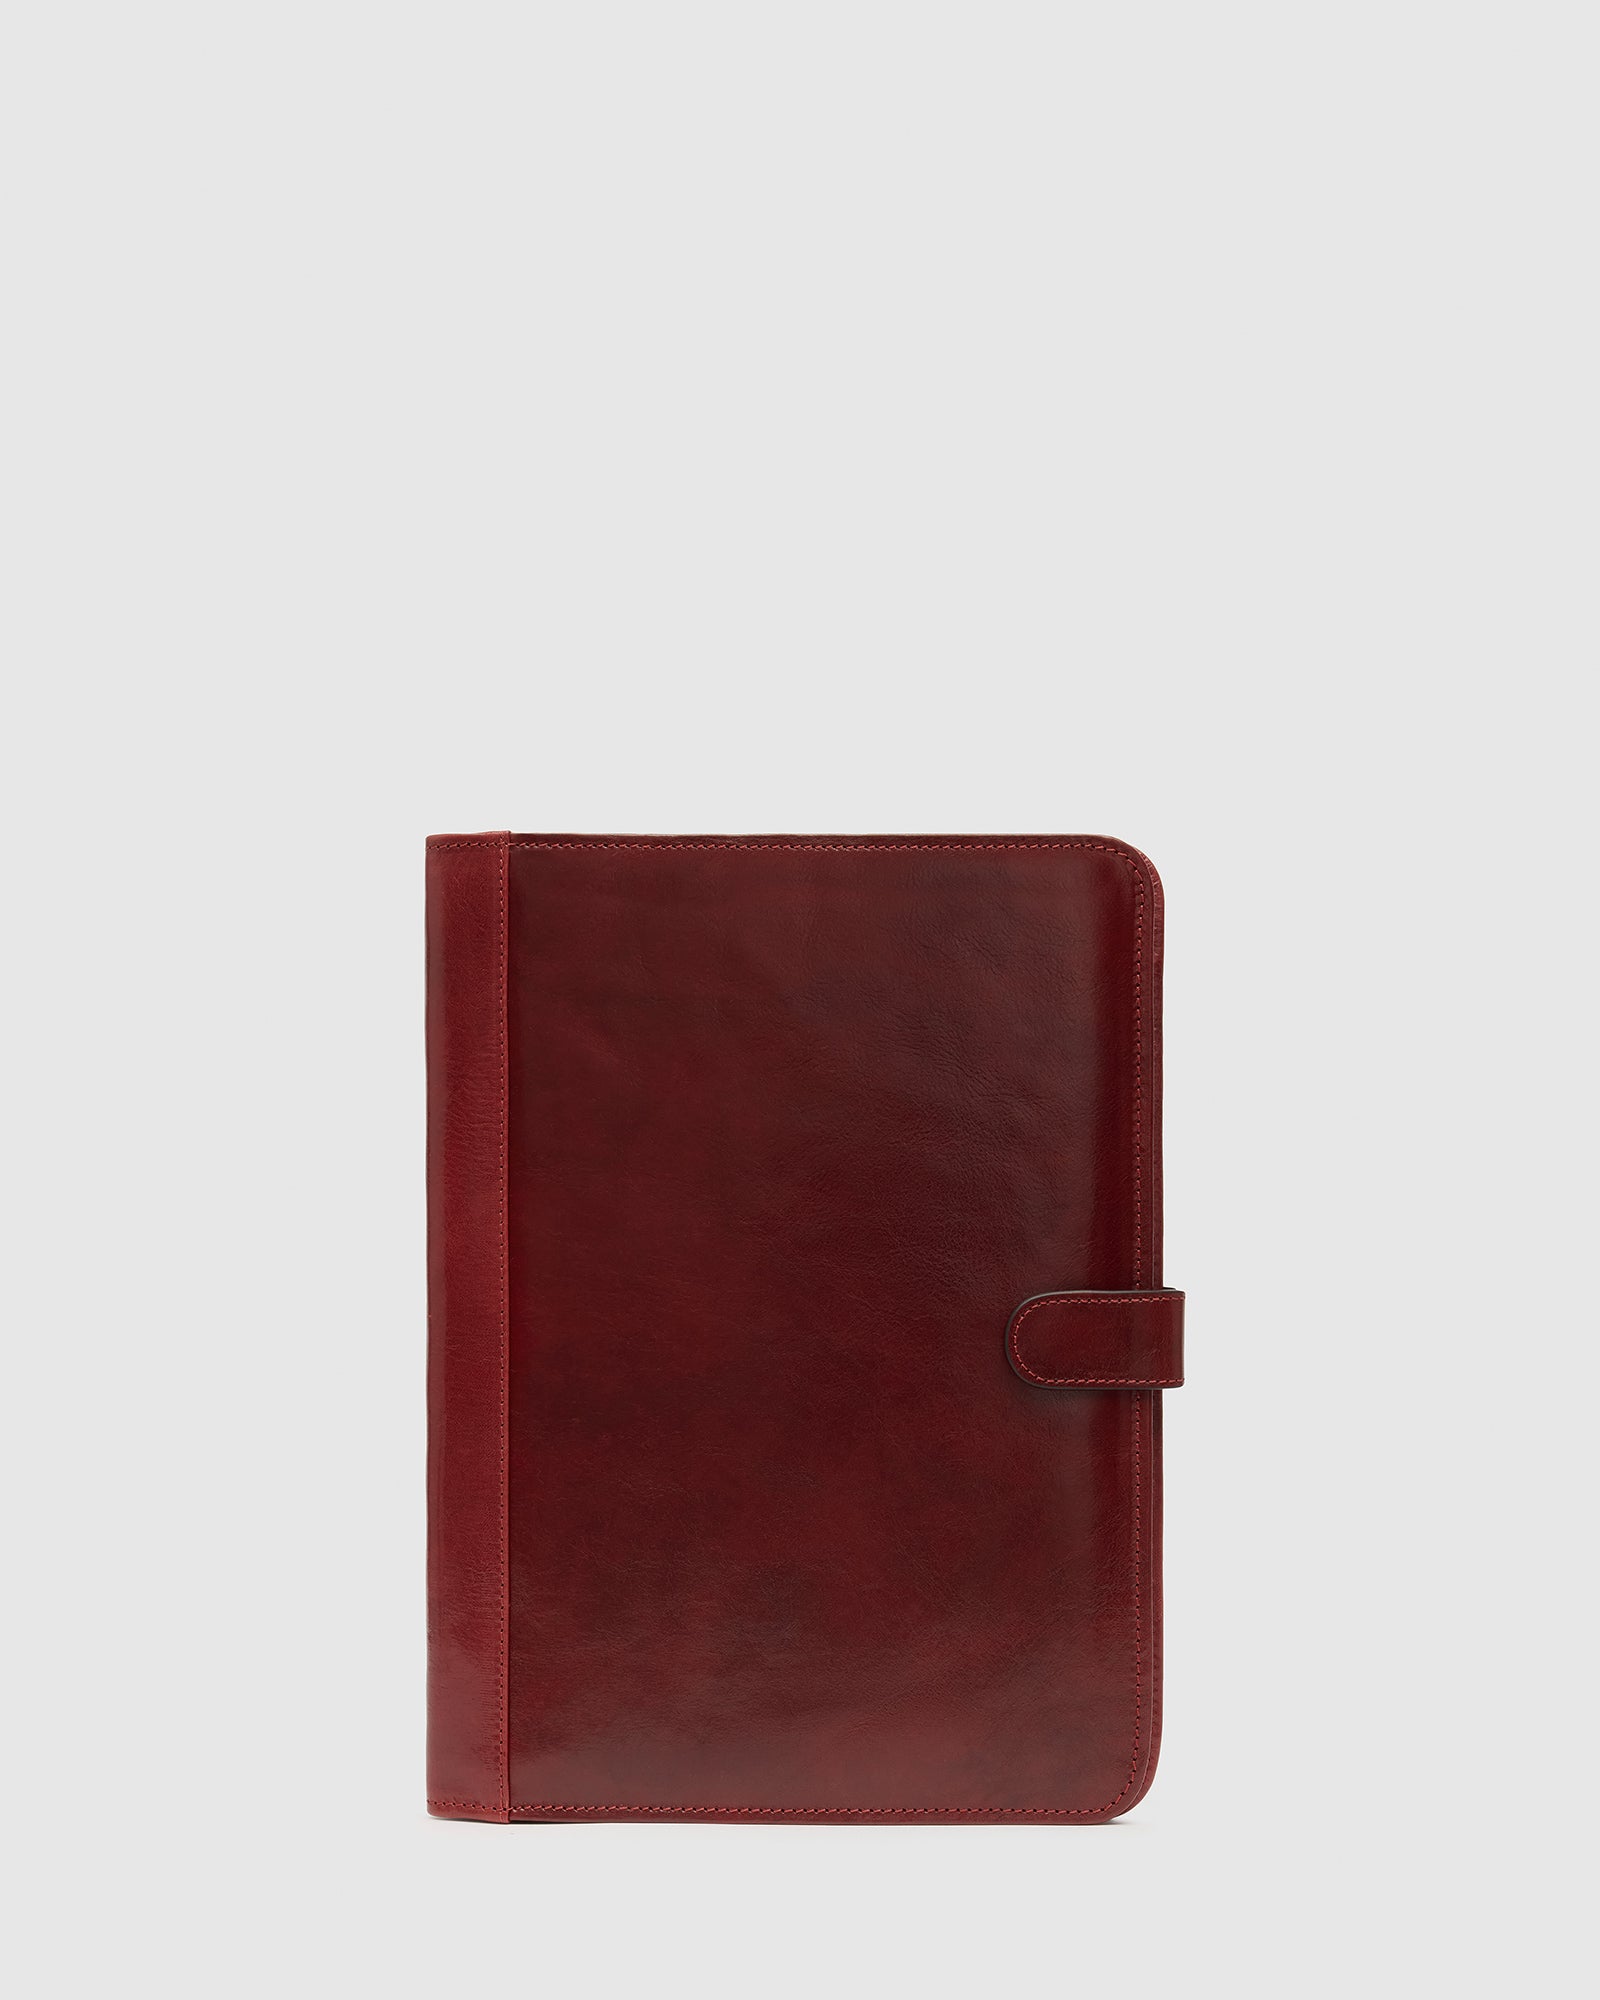 Imperial Red - Clip On Leather Compendium